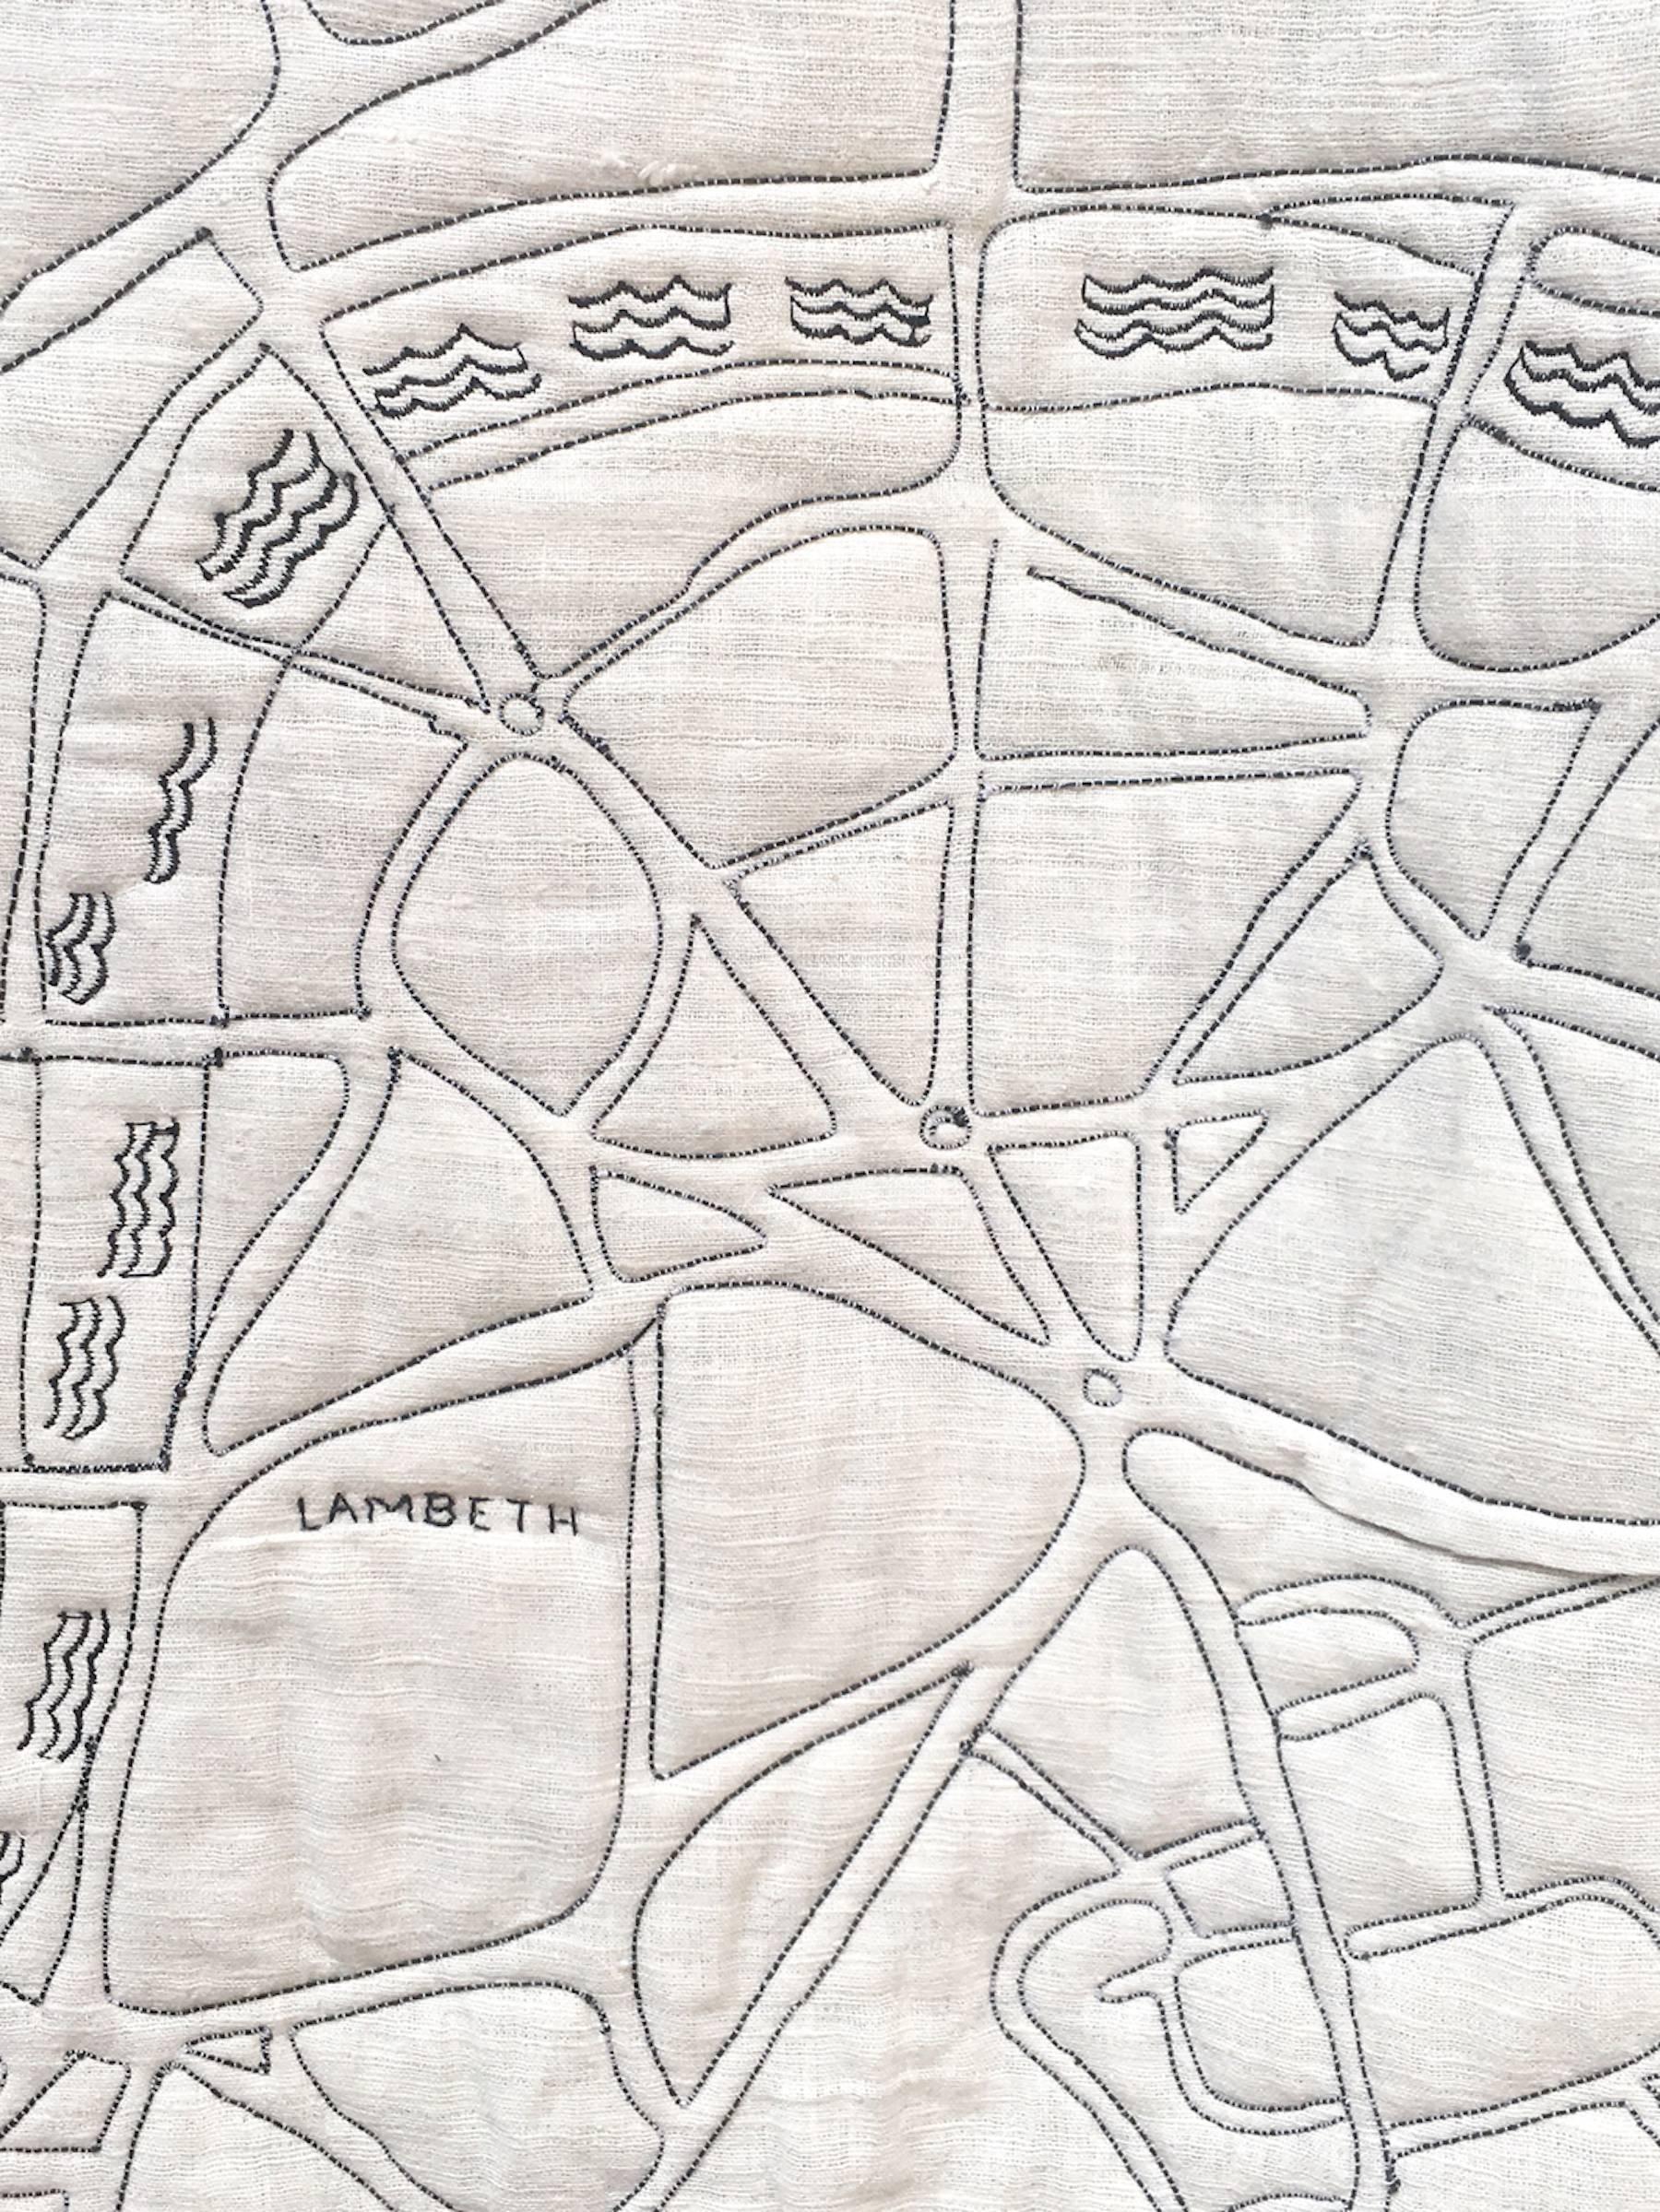 Embroidered Map of London Wall Hanging (custom made) For Sale 2